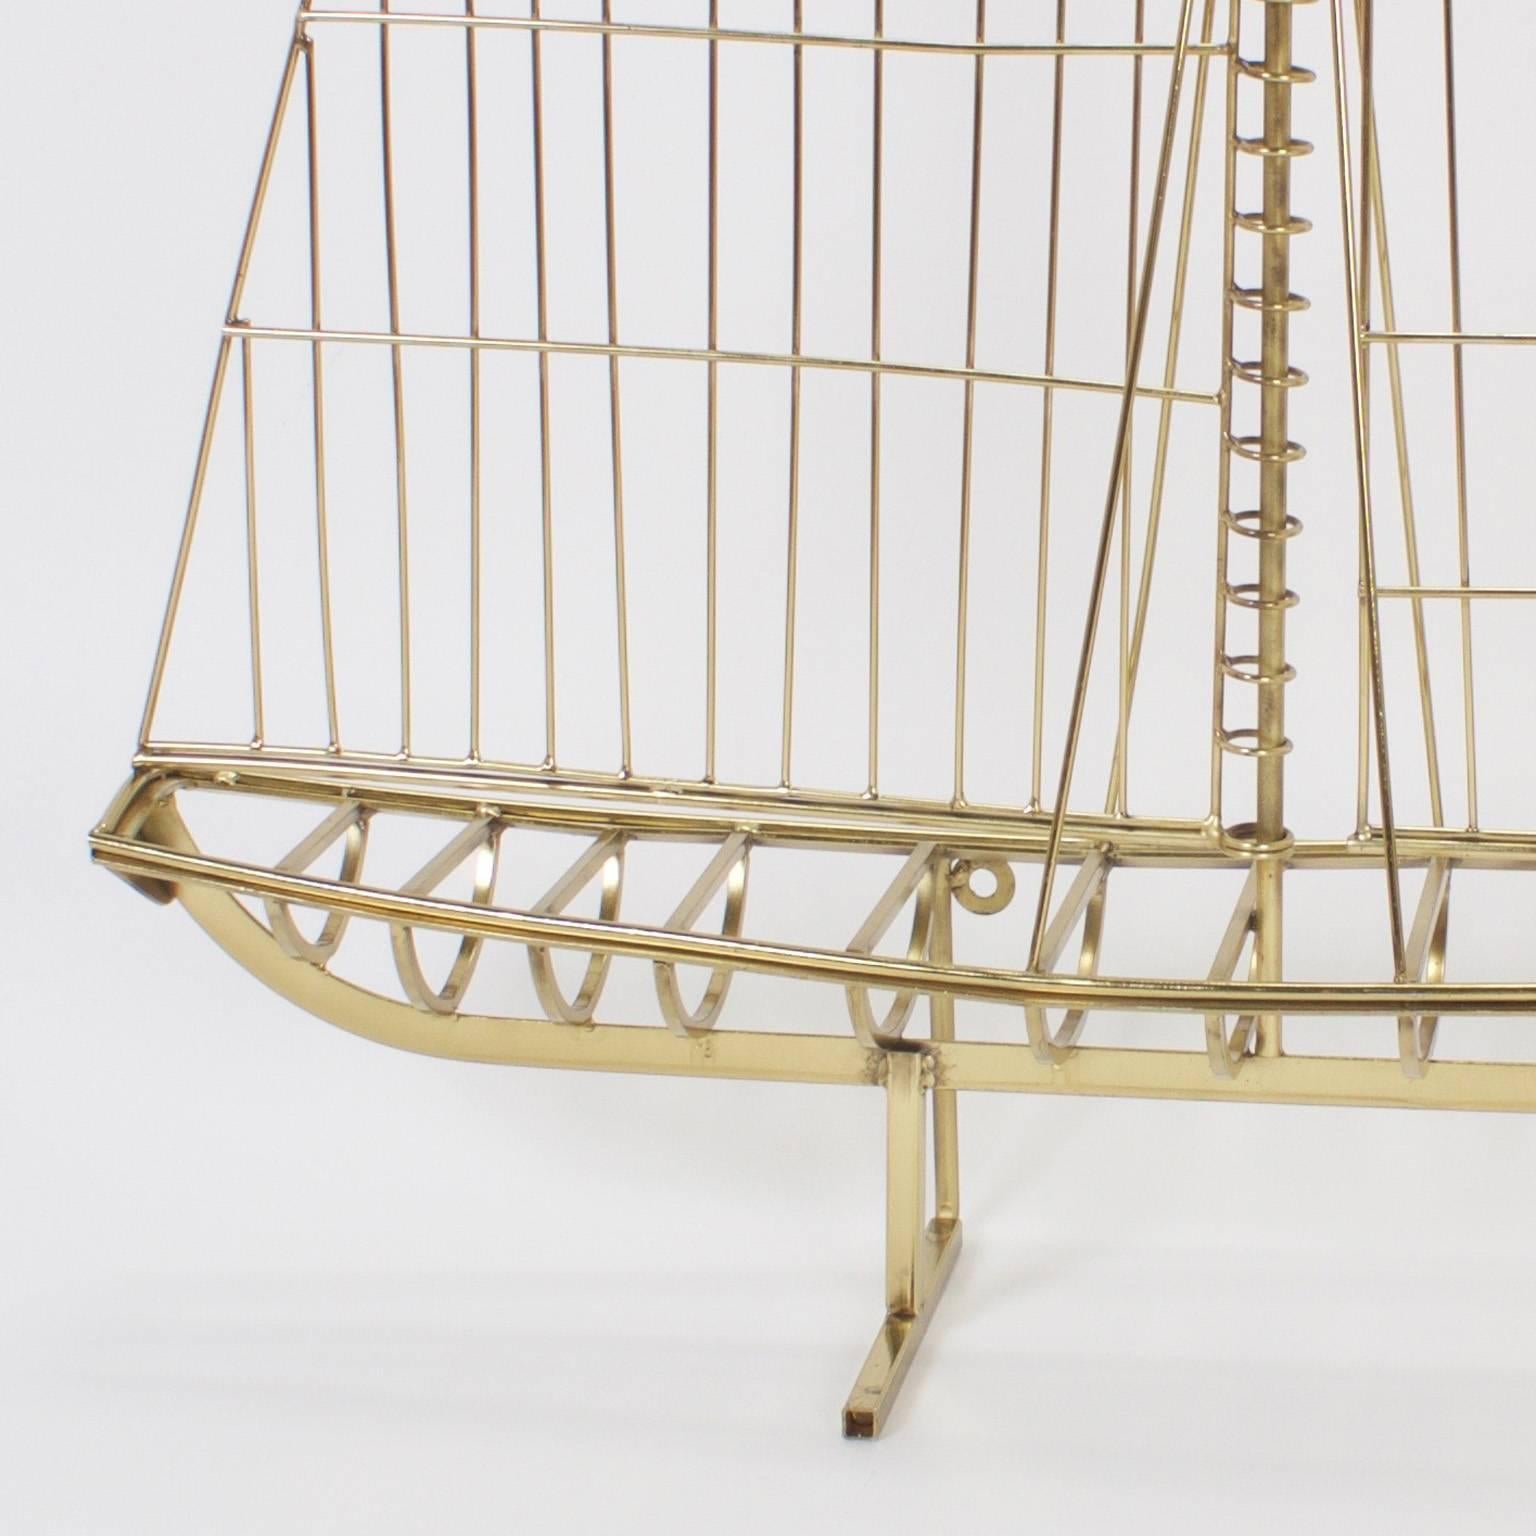 20th Century Jere Brass Plated Sailboat Model